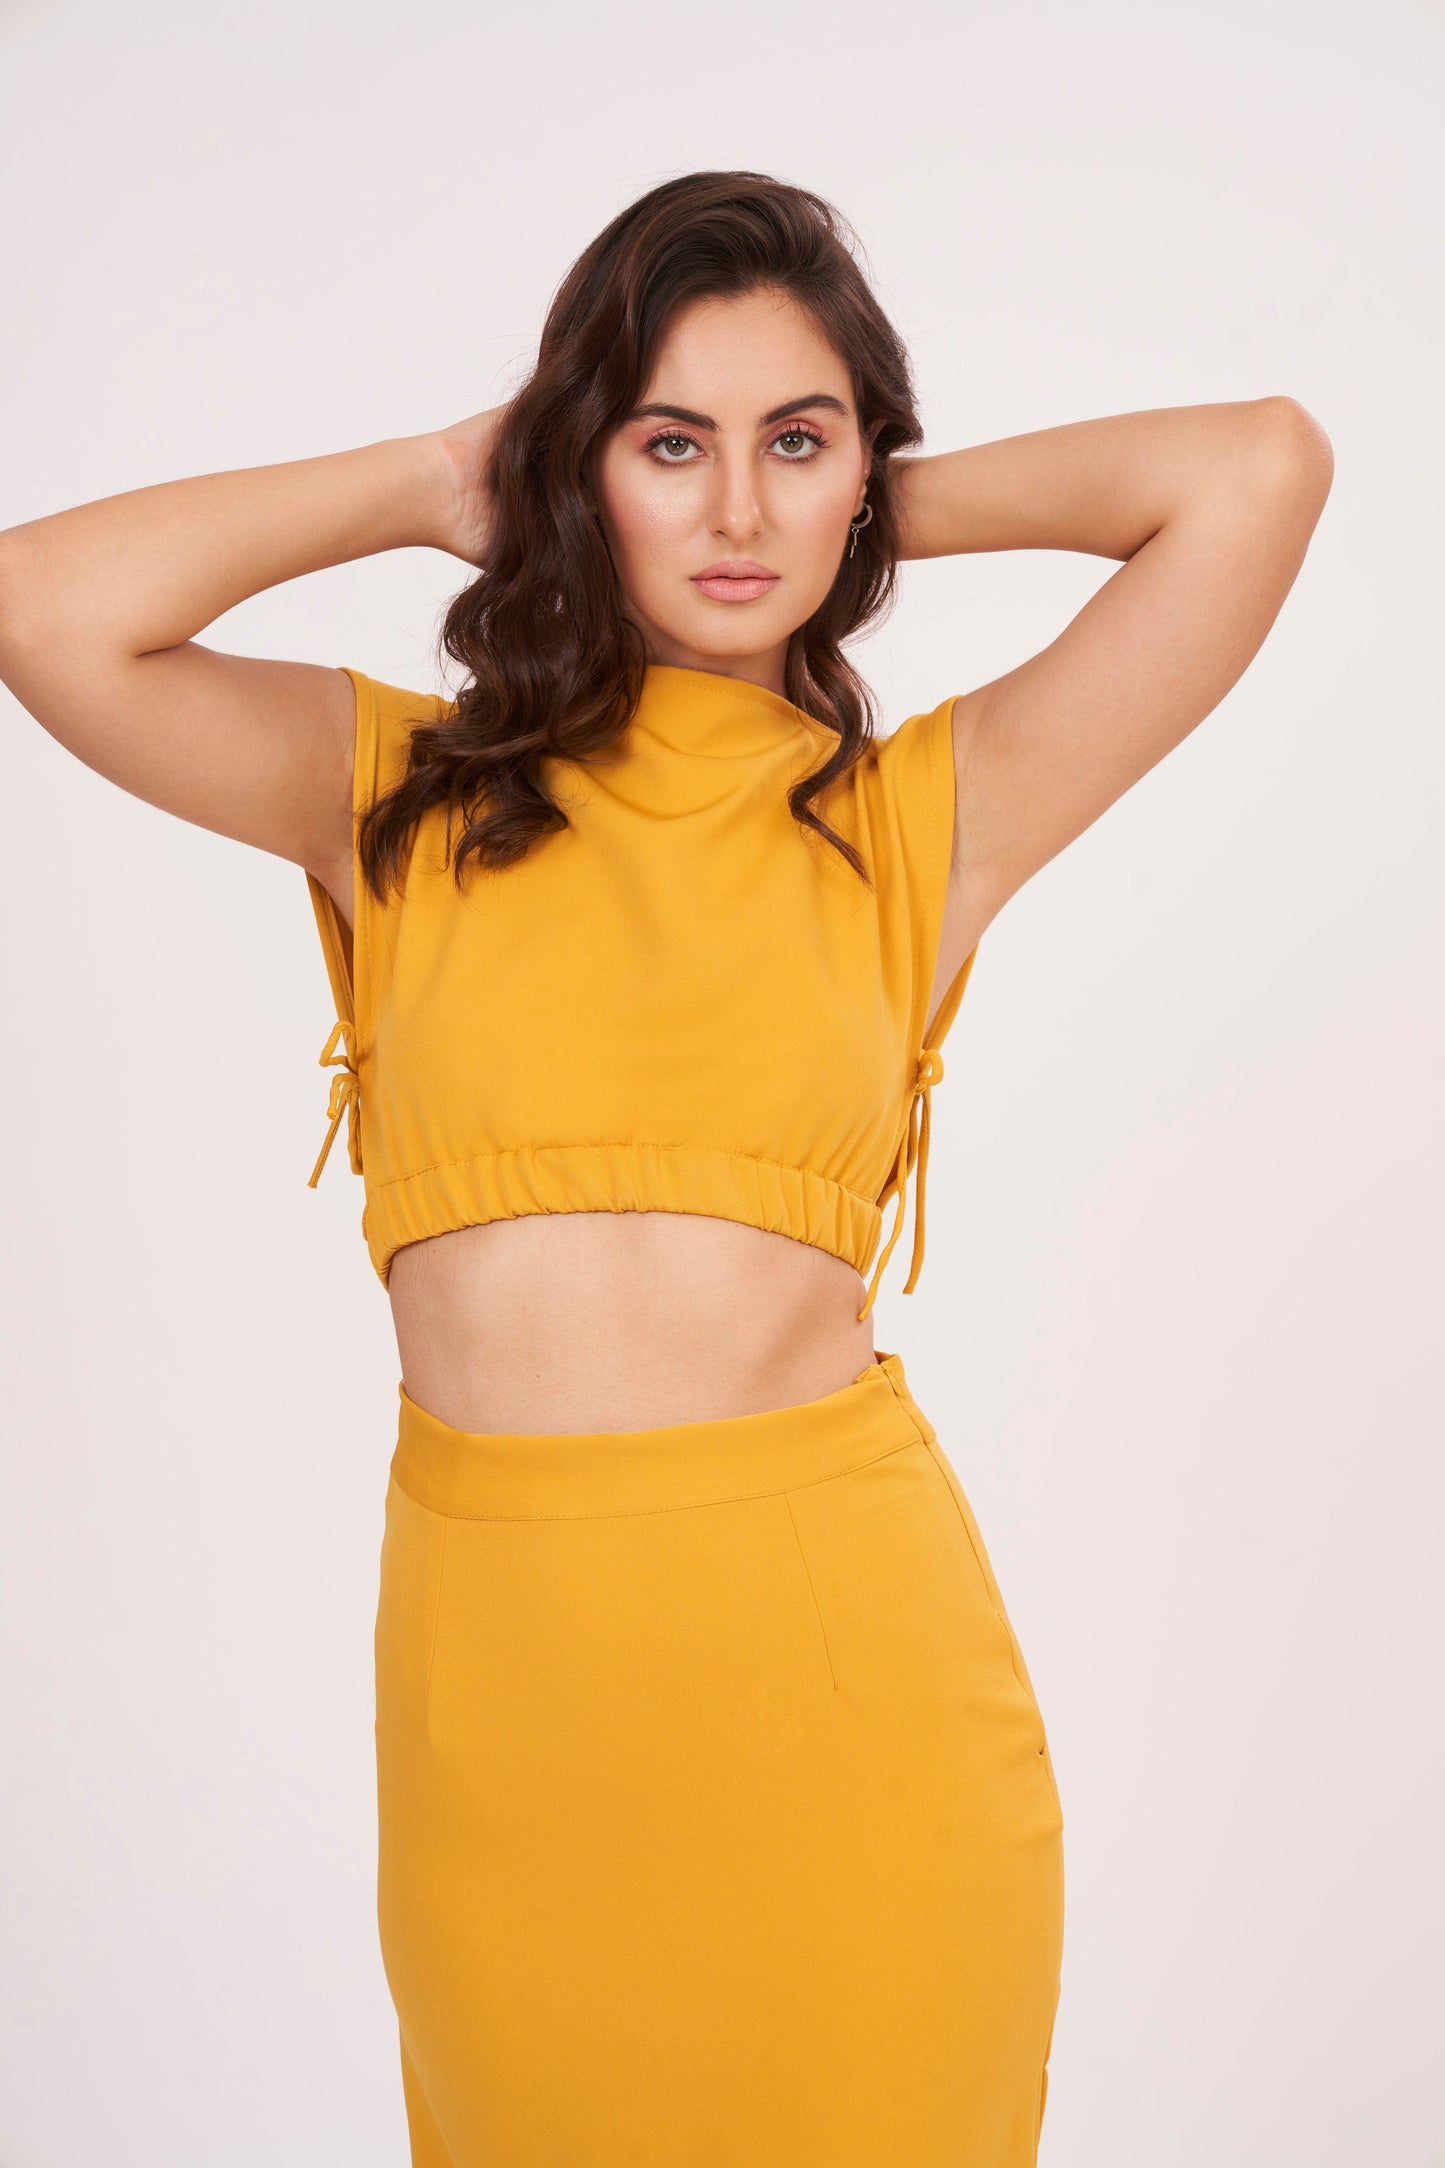 Mustard yellow square neck blouse made from high-quality muslin fabric. Clean and structured silhouette complements the ensemble.